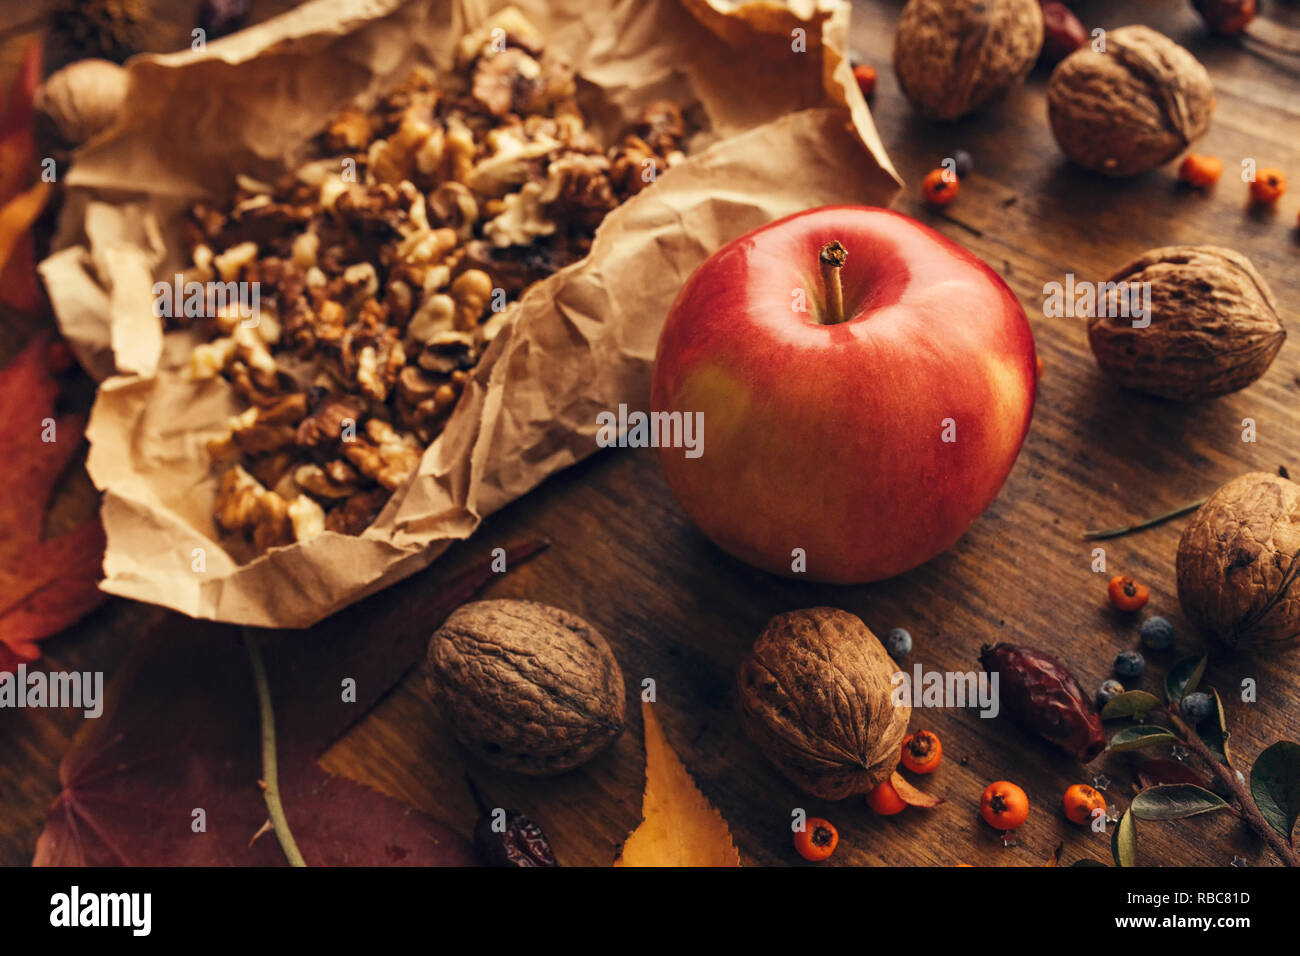 Apple and walnut, autumn abundance - healthy organic fruit on wooden table decorated with colorful maple leaves and berries, close up Stock Photo